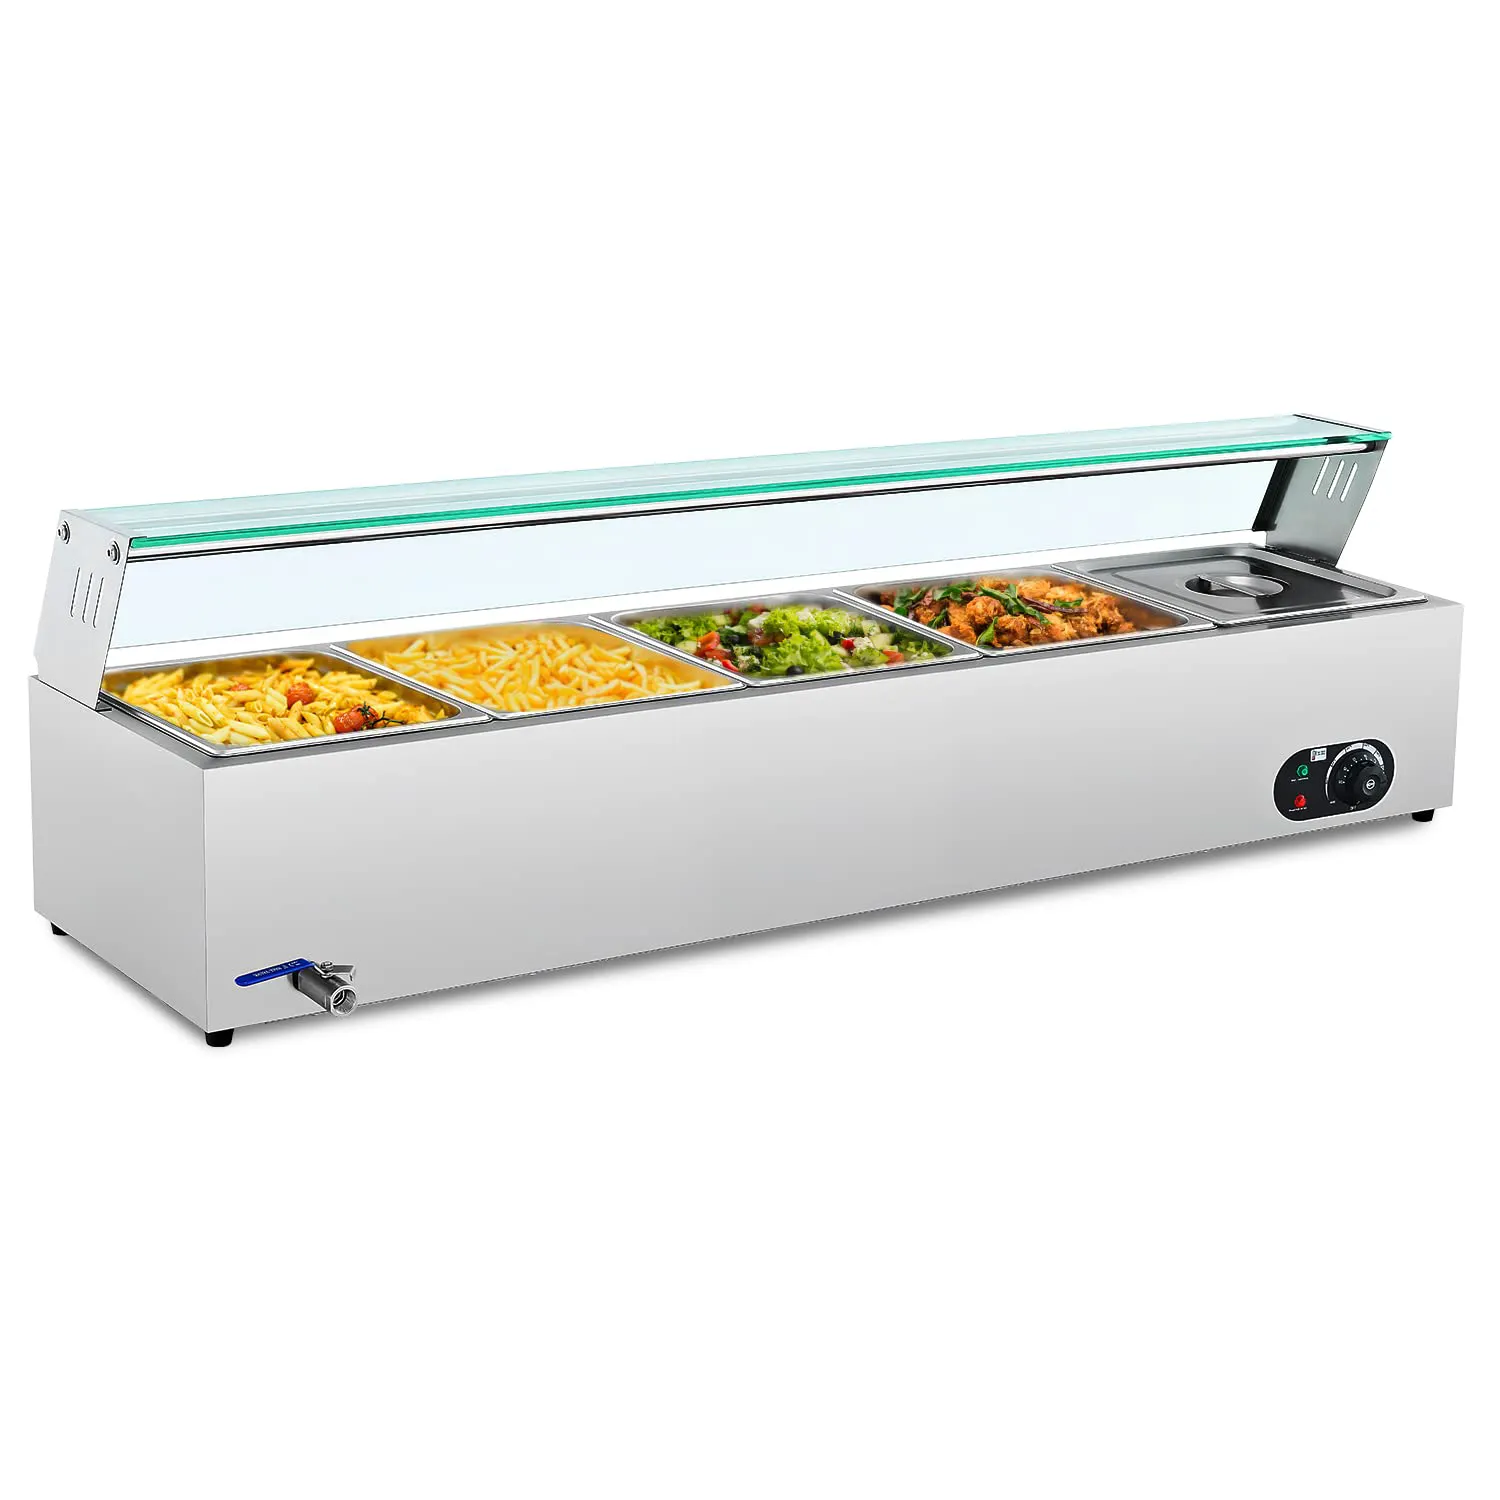 Electric Bain Marie Food Warmer Display with Glass Stainless Steel Bain Marie Counter Steam Table Buffet Equipmentfor Catering